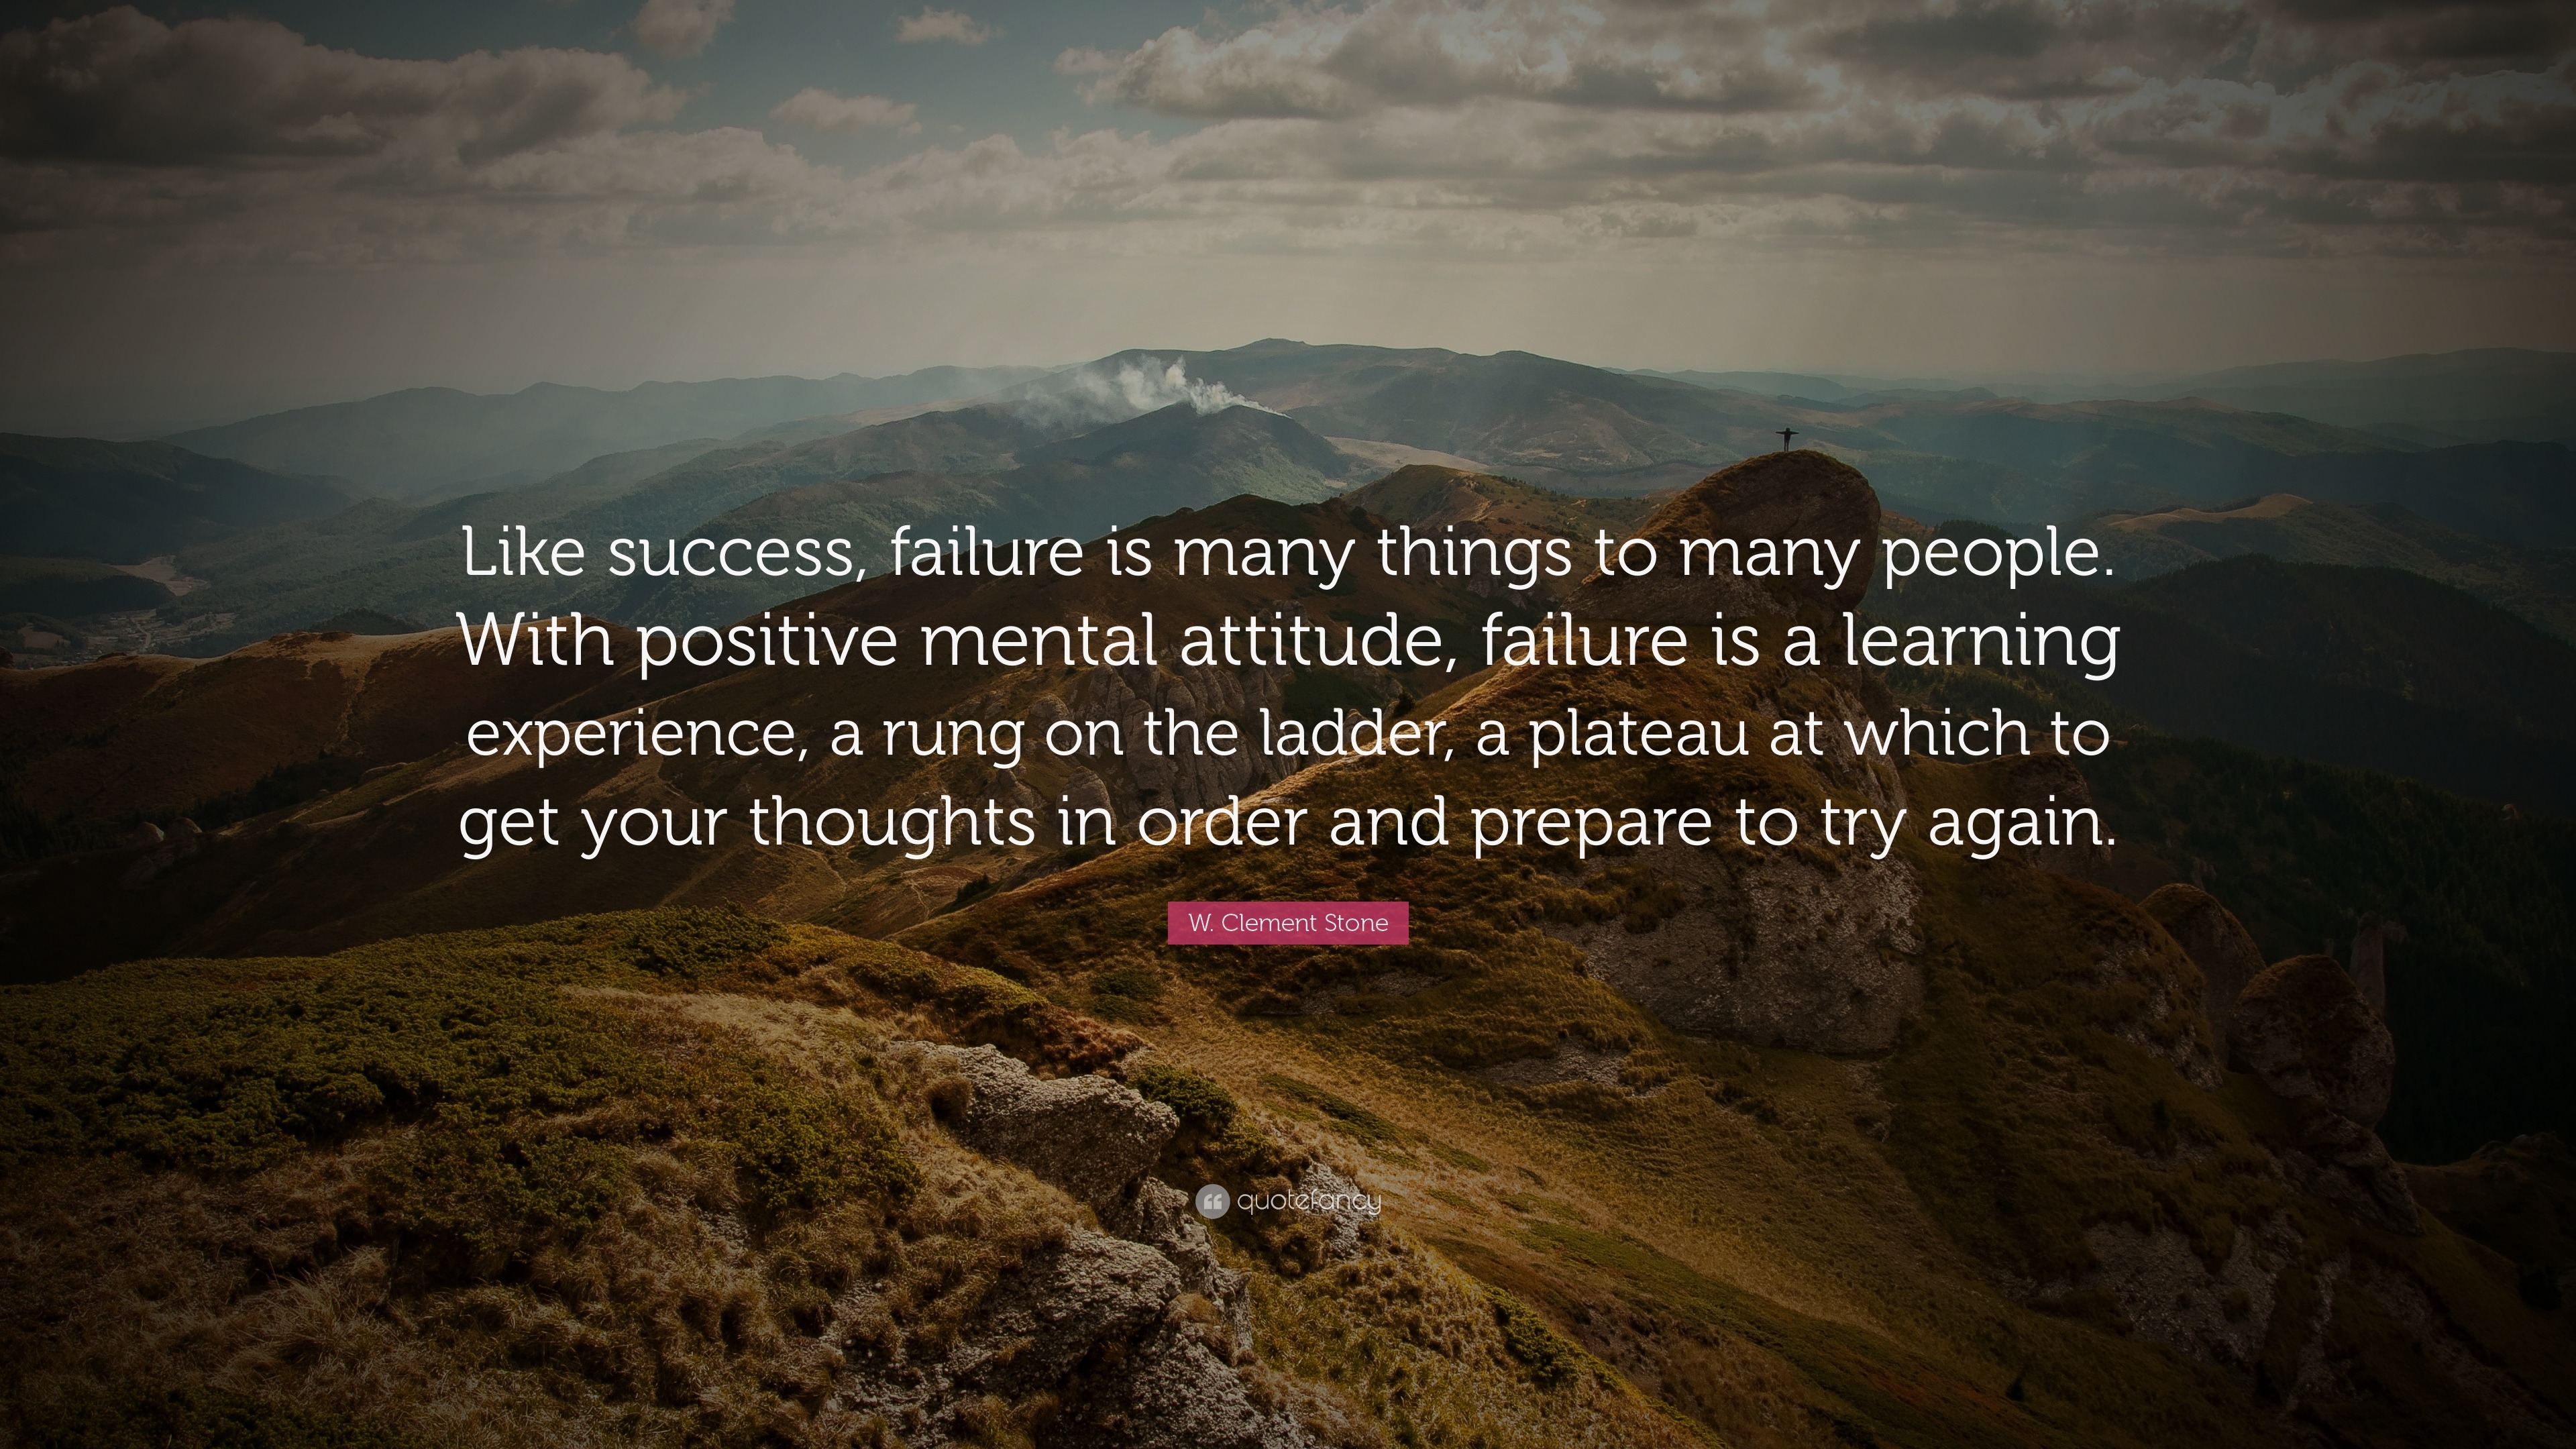 W. Clement Stone Quote: “Like success, failure is many things to many